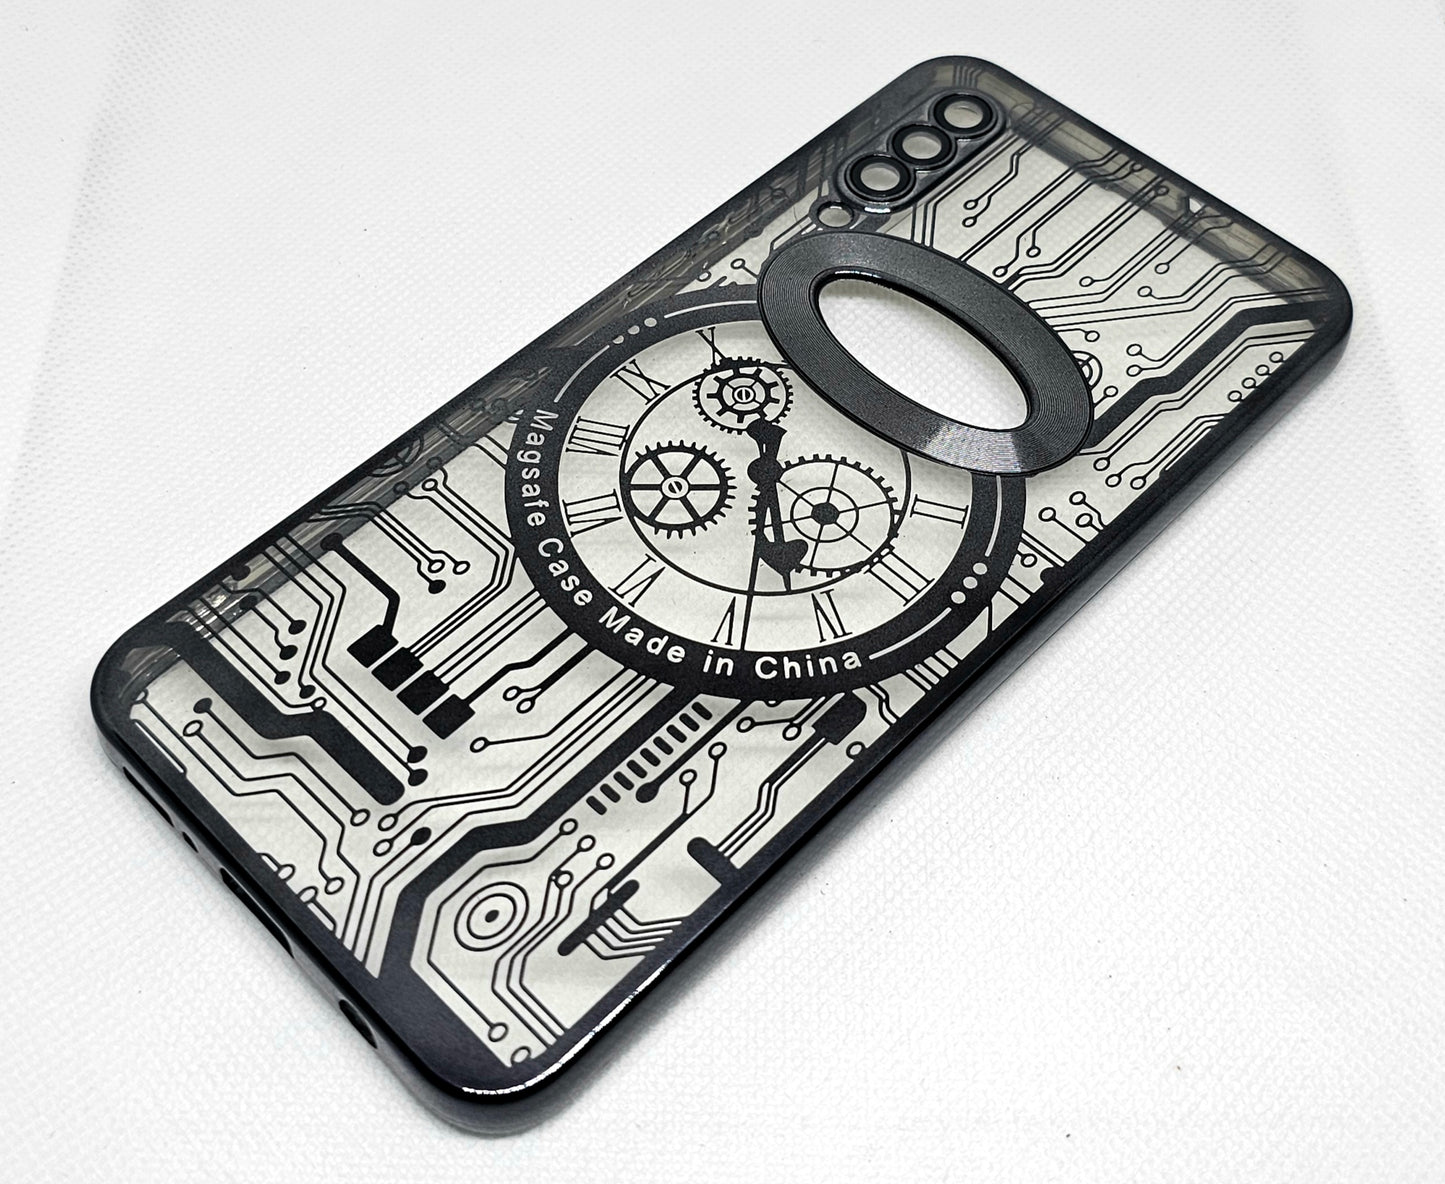 Samsung A50/A50s/A30s Back Cover with CD Watch Machine Design